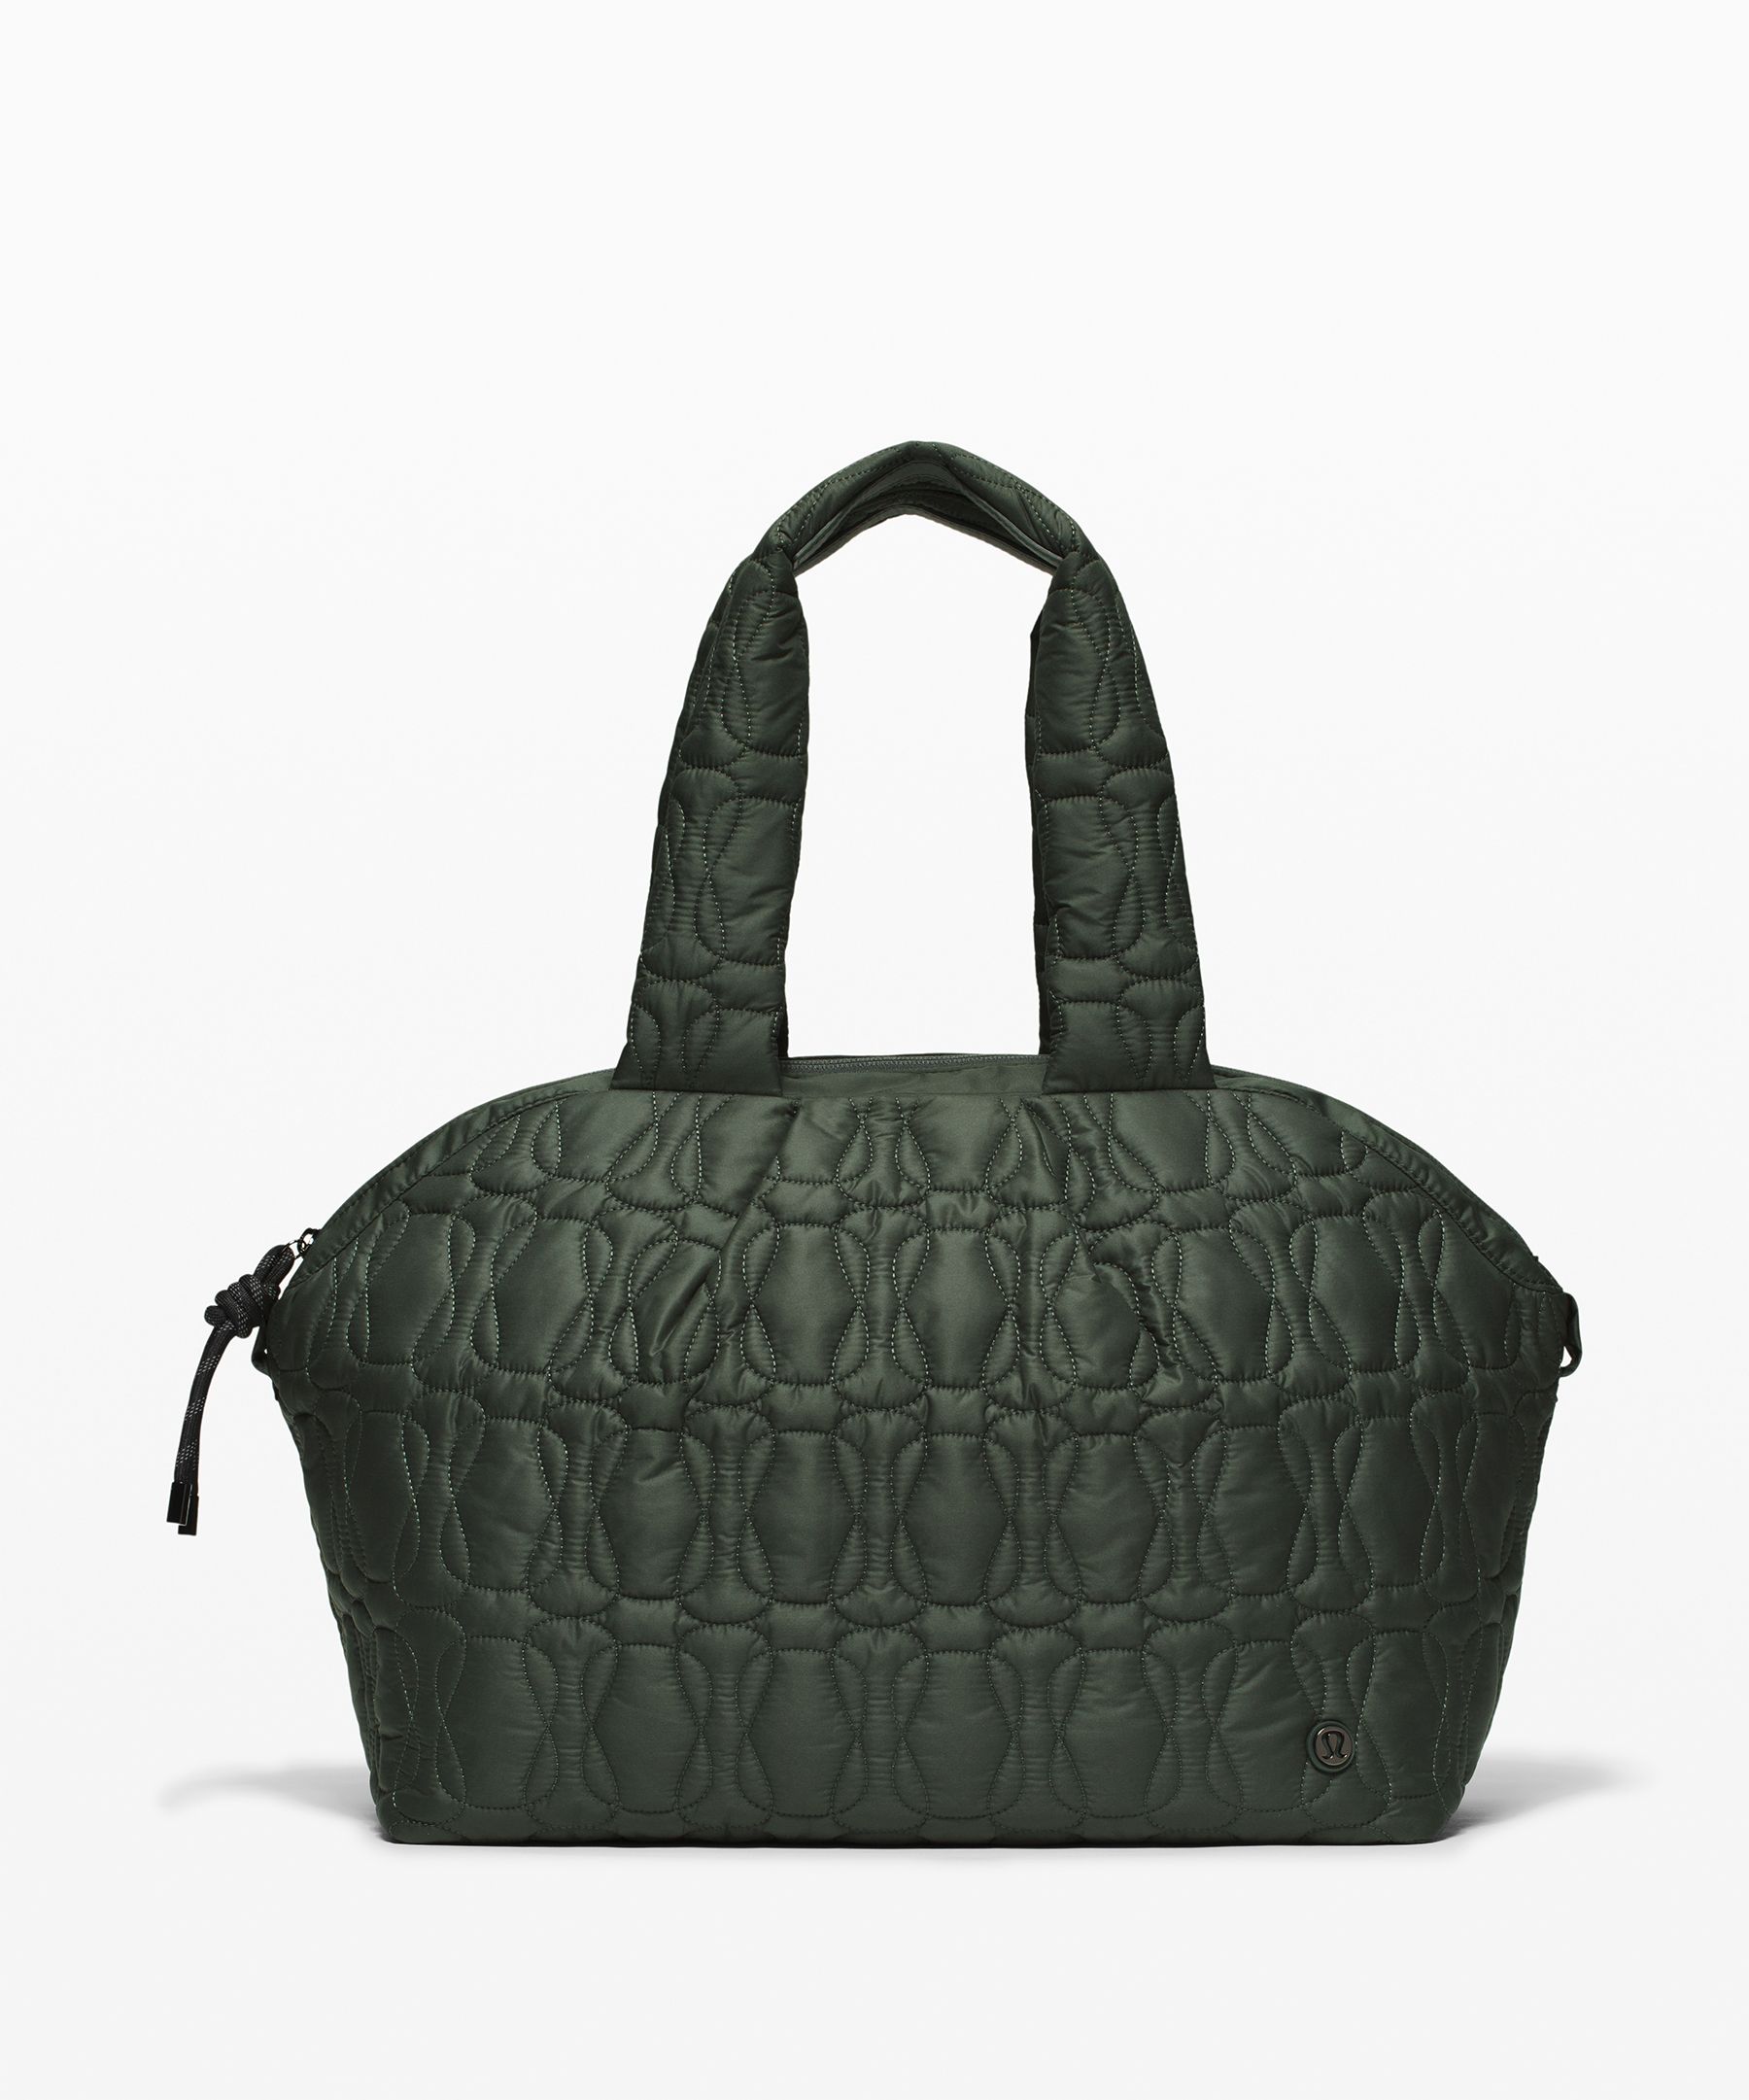 Lululemon Quilted Embrace Tote Bag 20l In Green